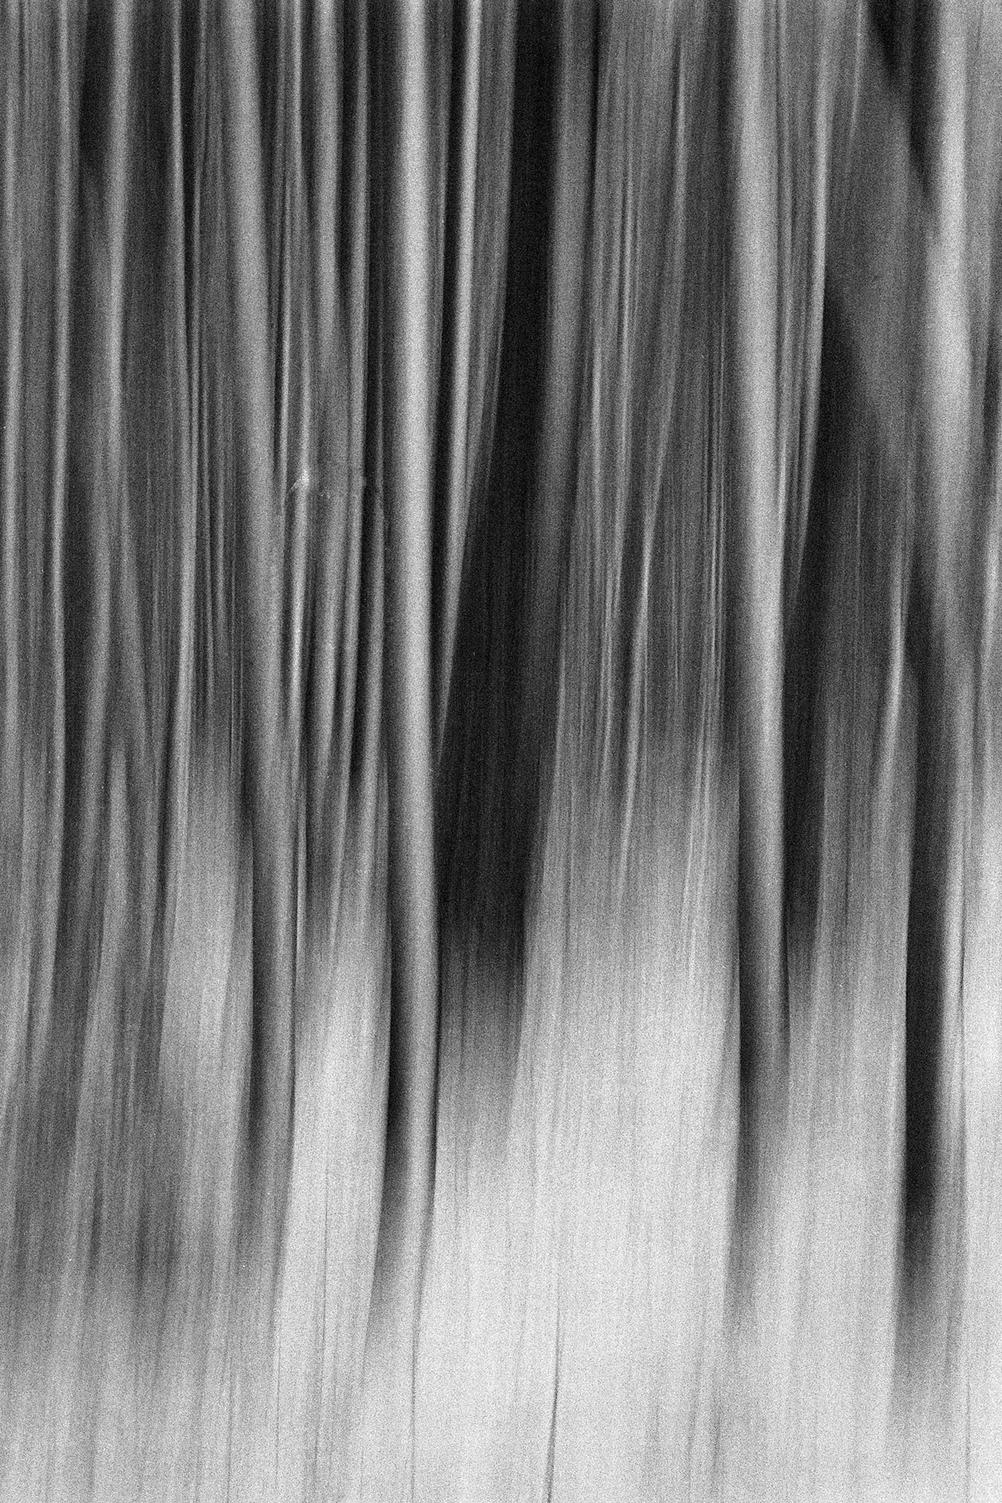 Motion photo of trees.